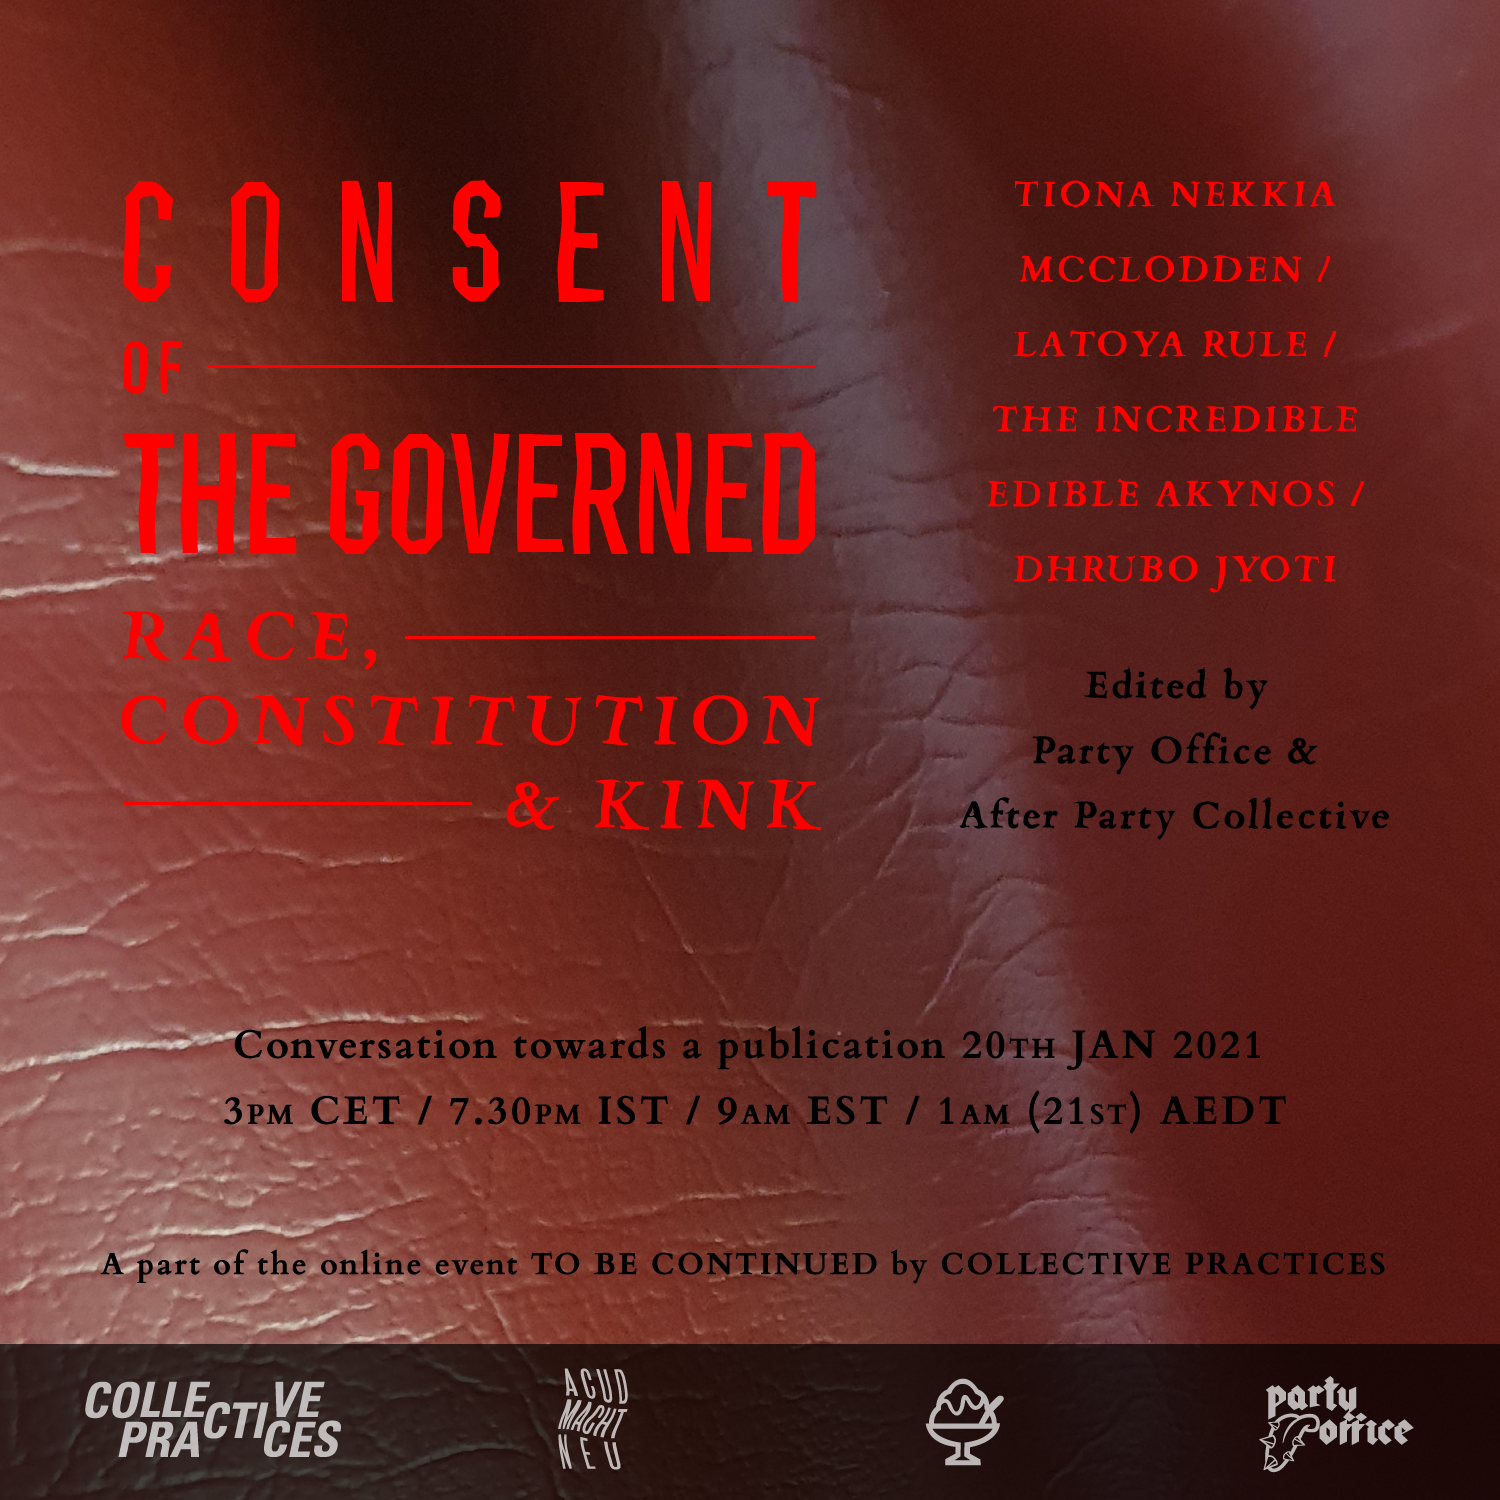 Consent of The Governed: Race, Constitution & Kink